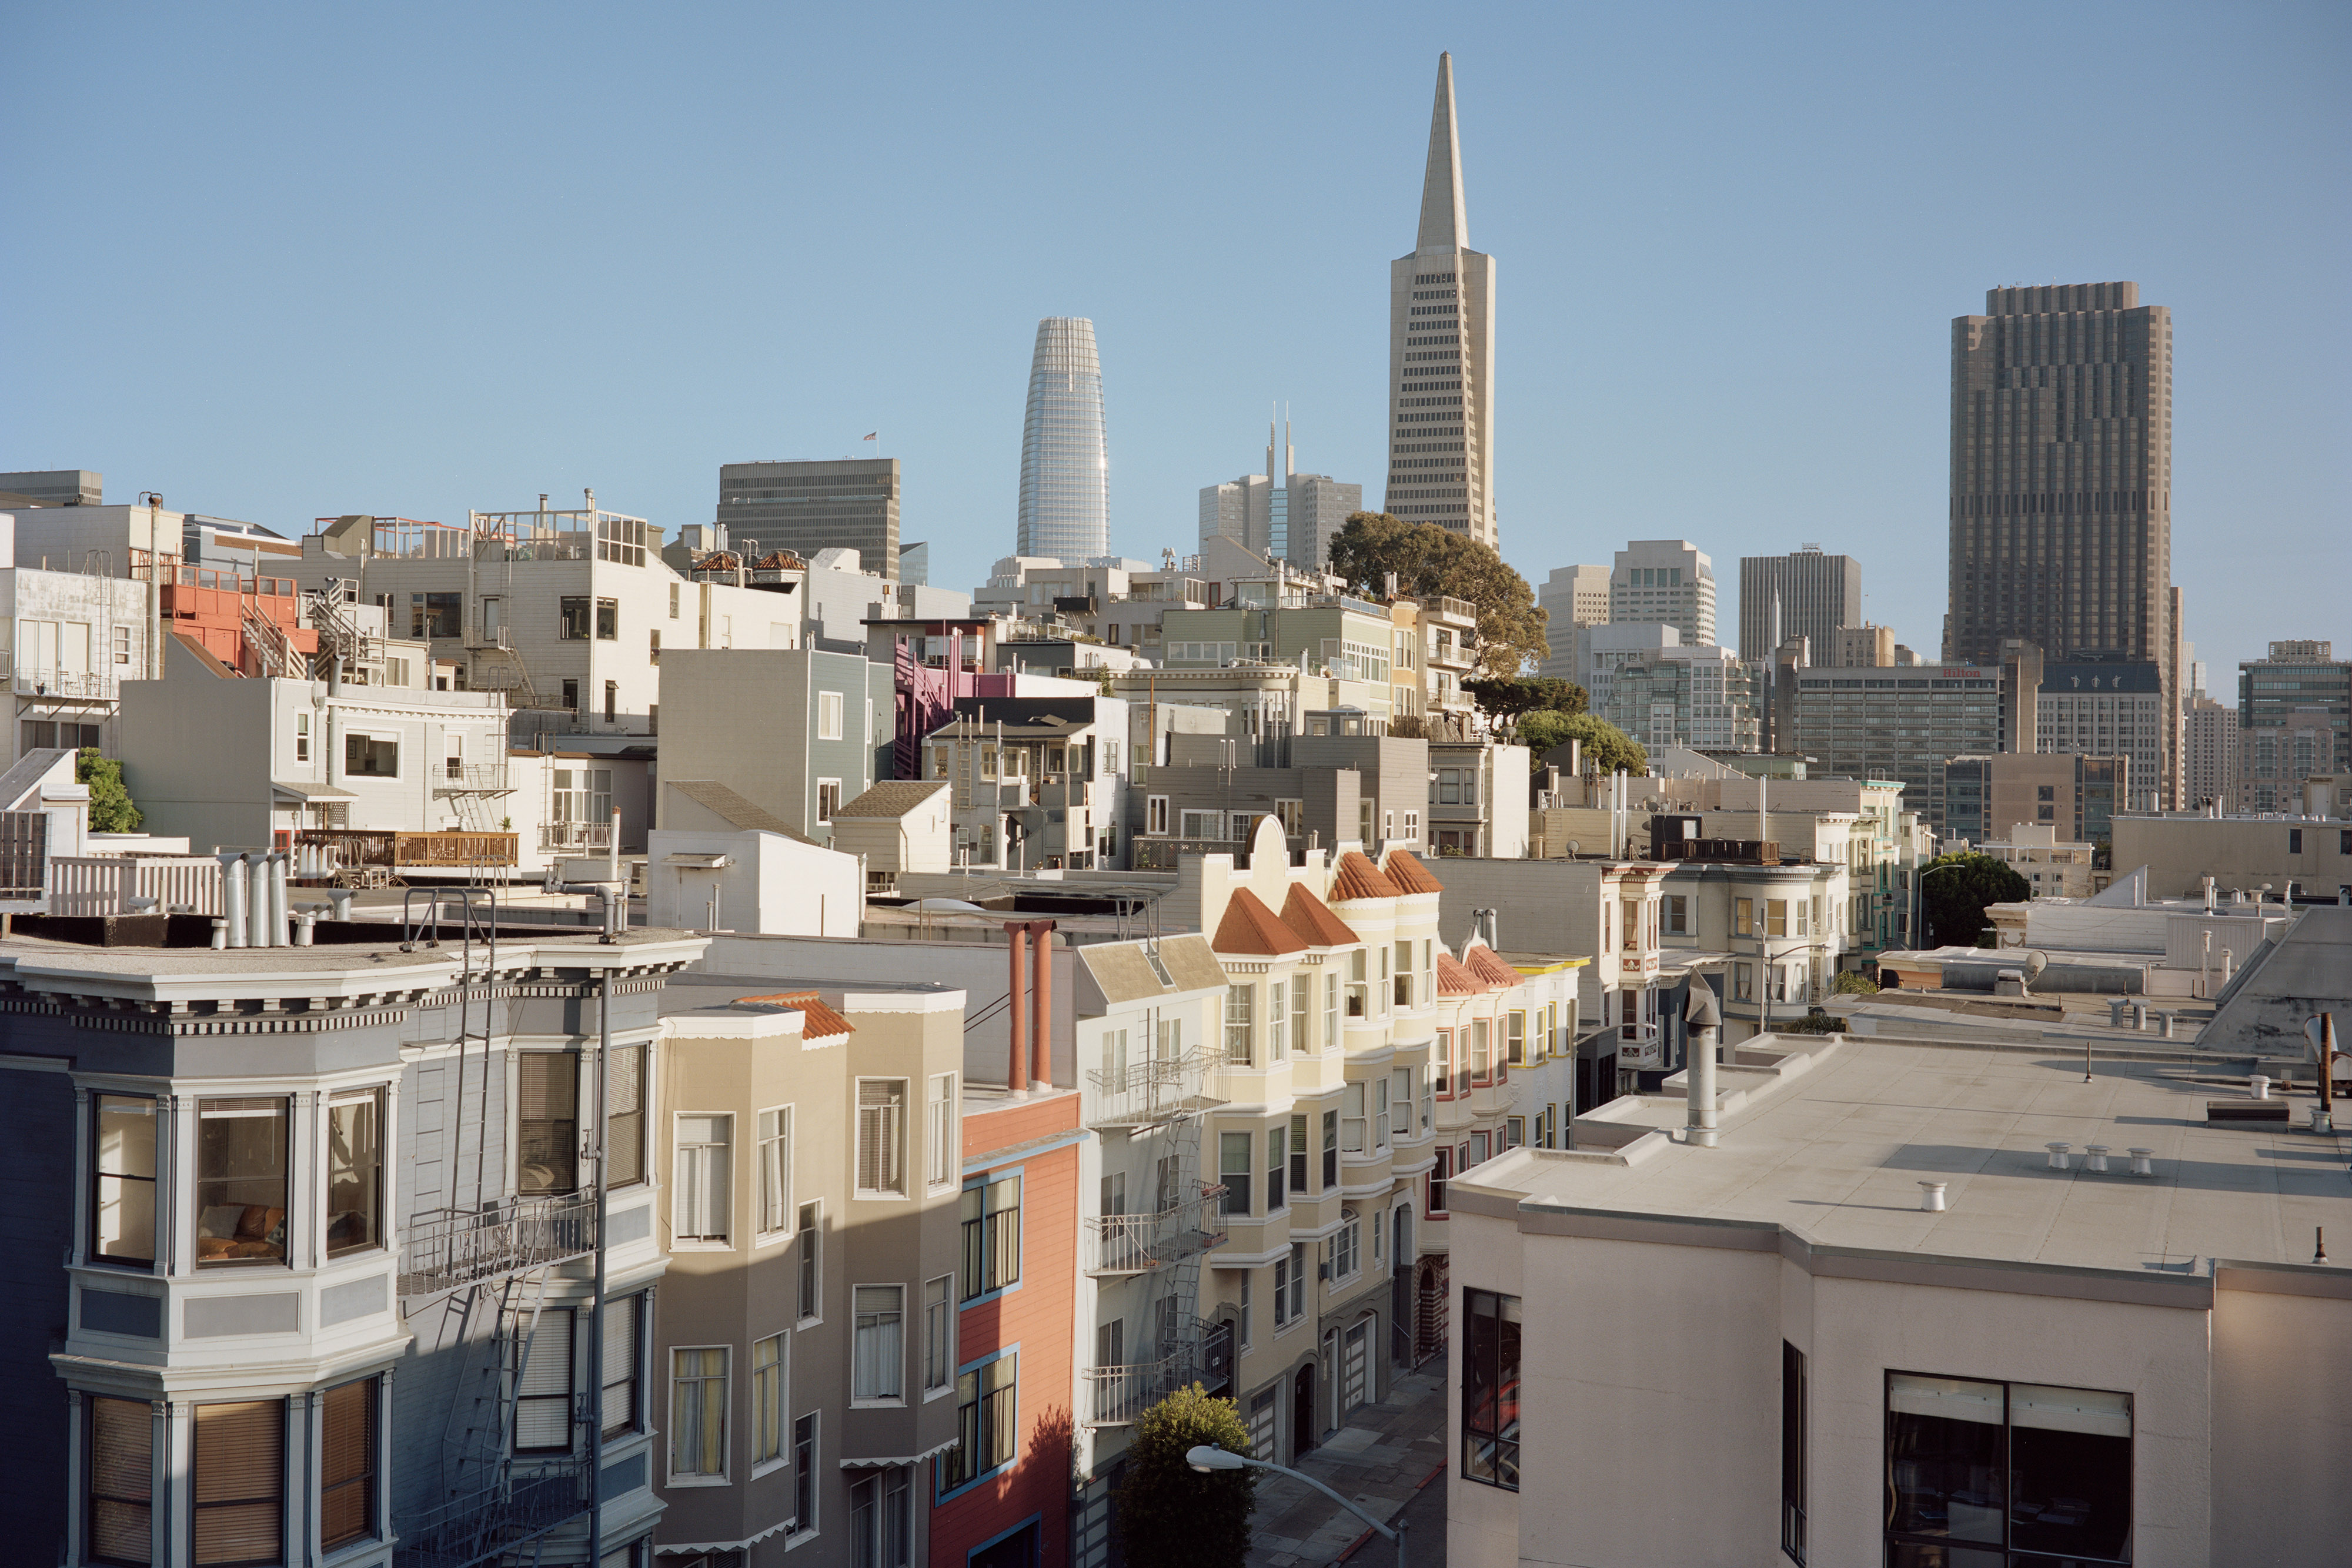 View of Financial District from Telegraph Hill, San Francisco, California